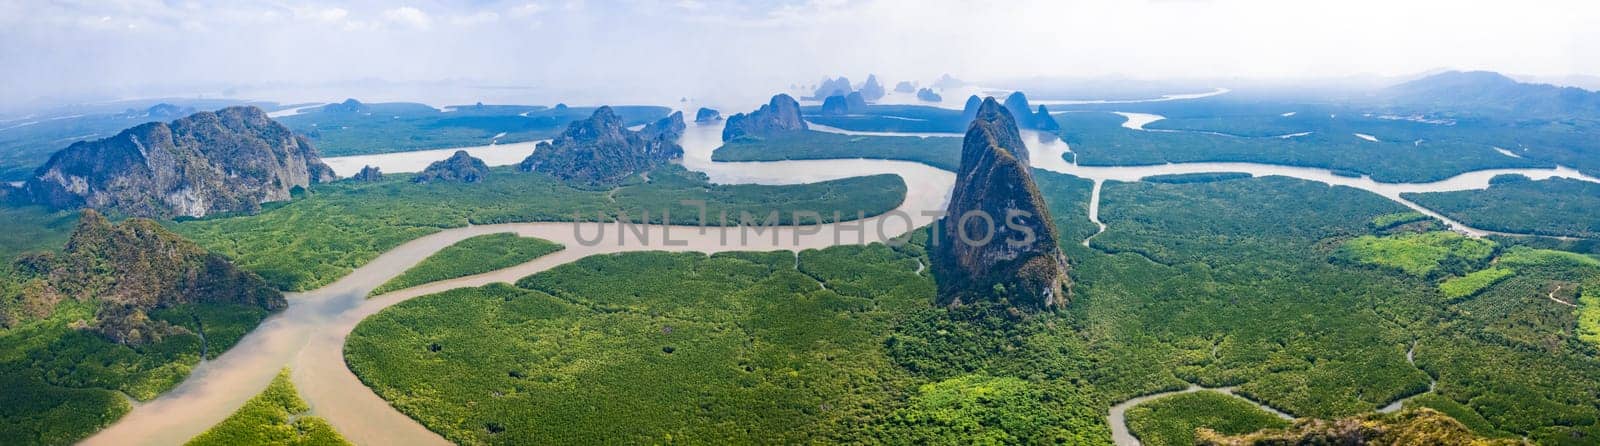 Aerial view of Phang Nga bay, Thailand by worldpitou